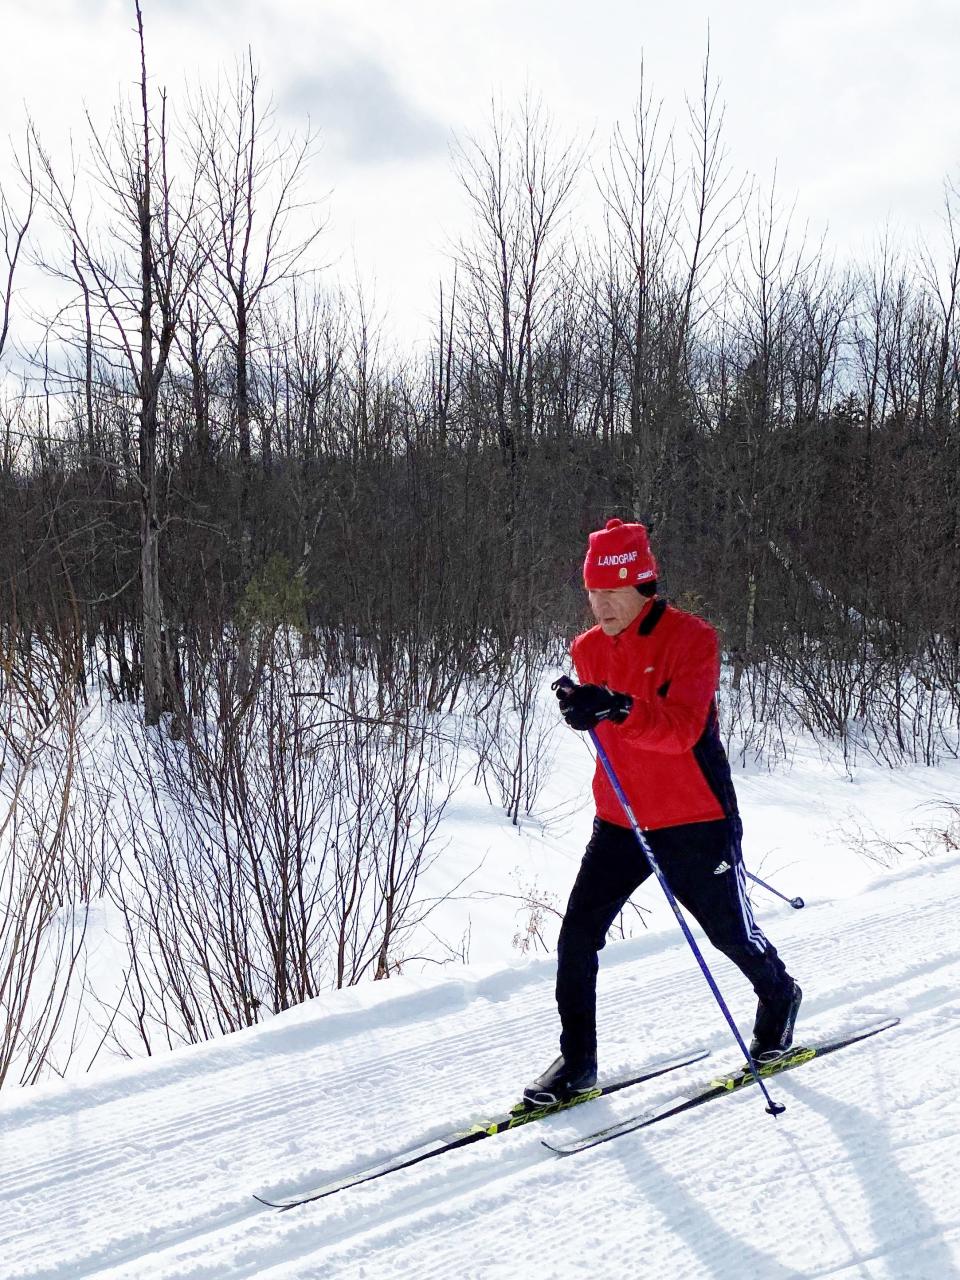 Ernie St. Germaine has gone the distance in every Birkie and done what he could to inspire others who were struggling.